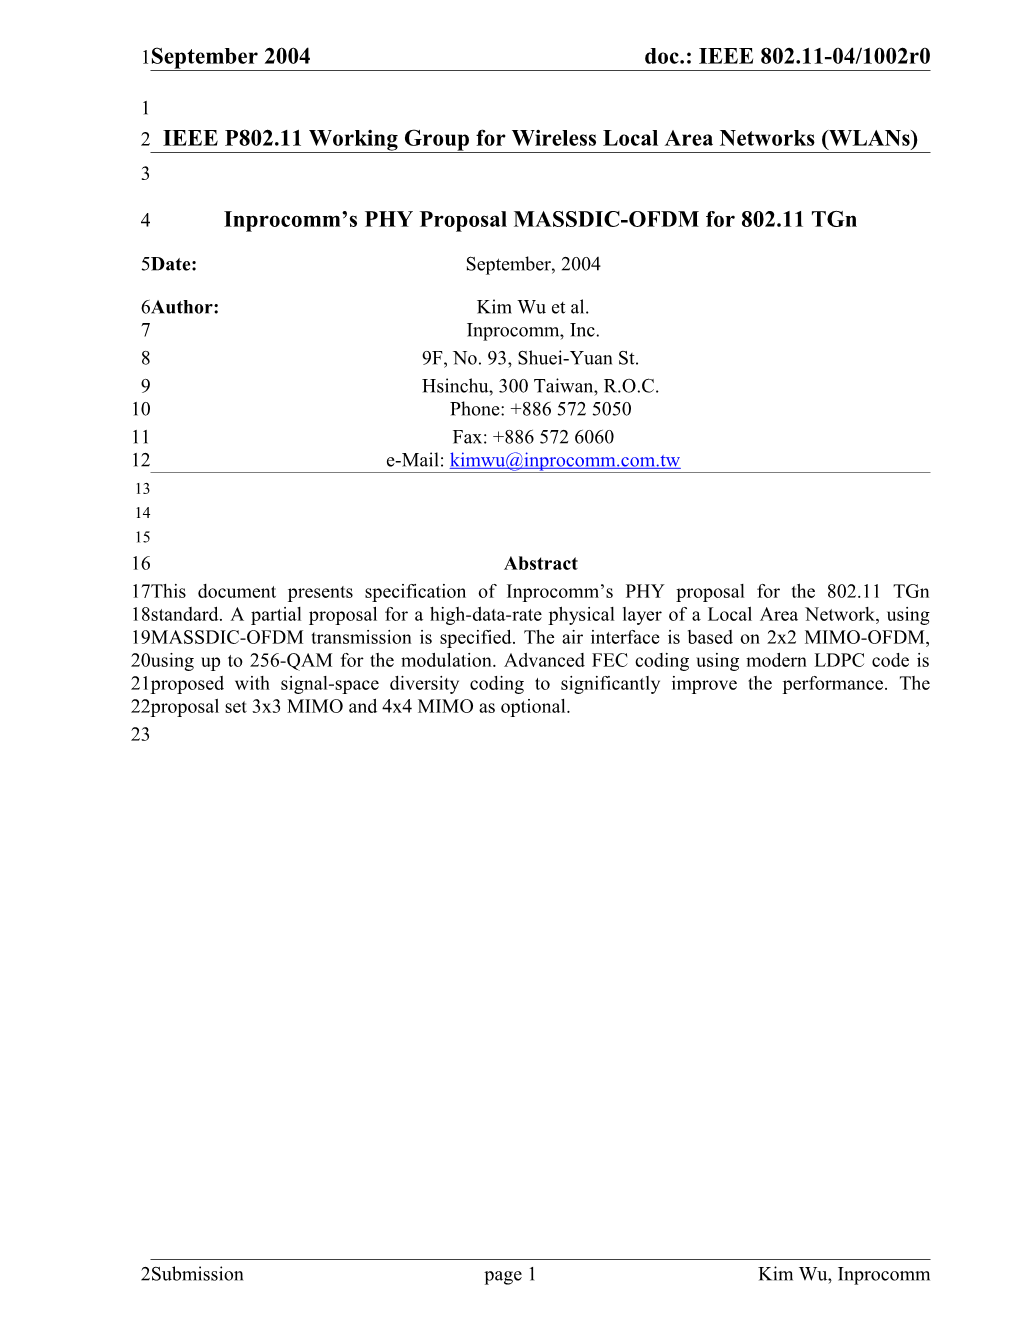 IEEE P802.11 Working Group for Wireless Local Area Networks (Wlans)